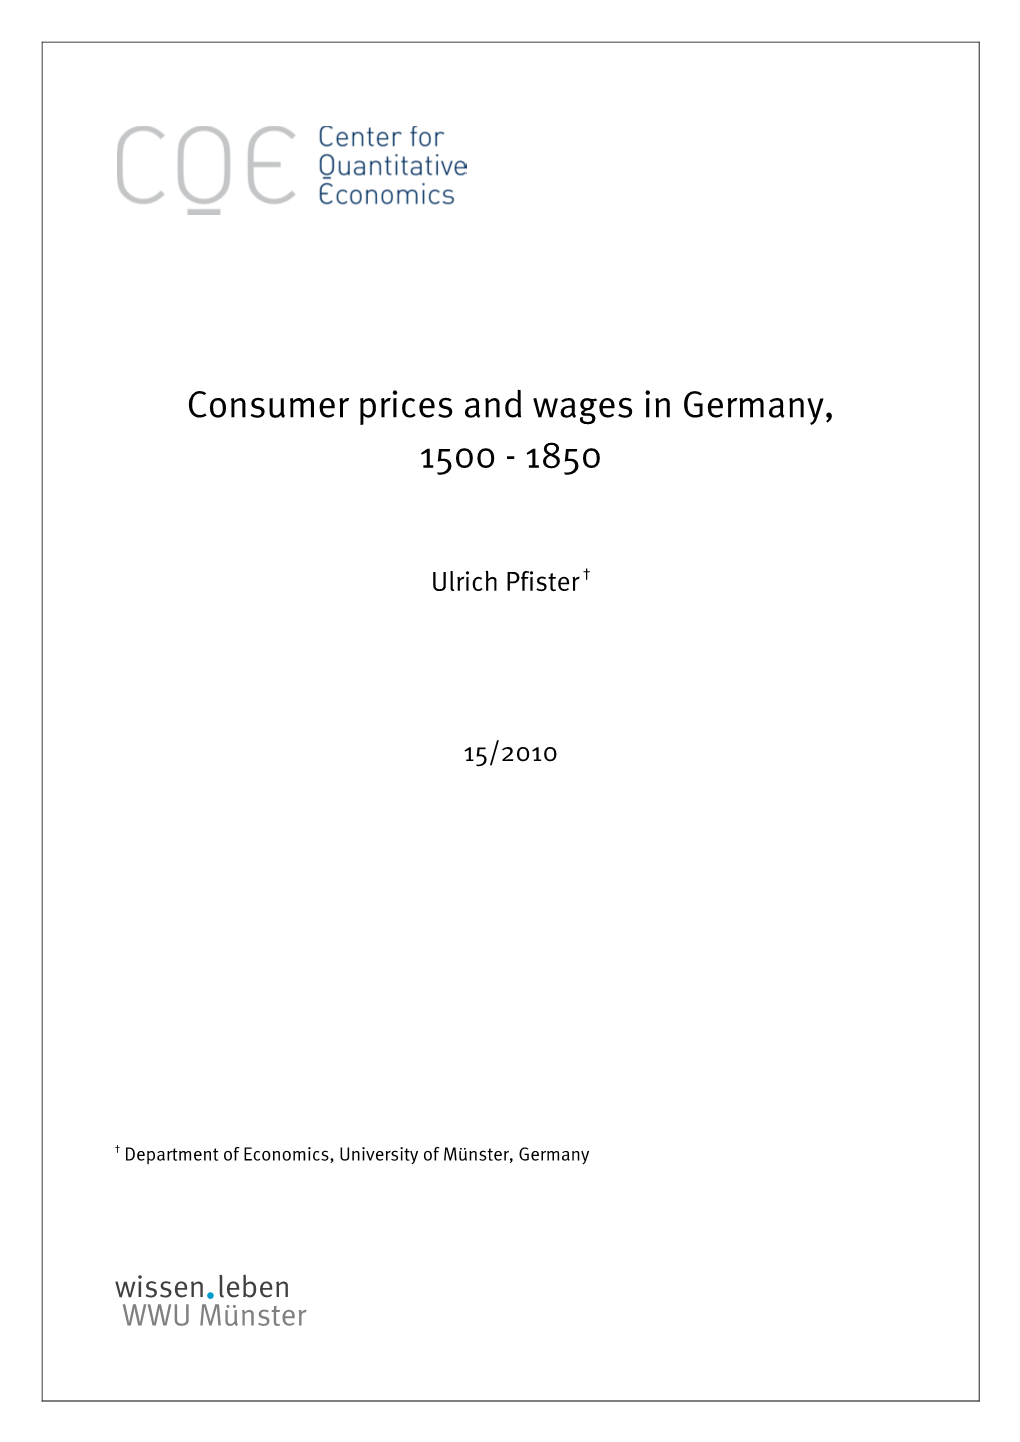 Consumer Prices and Wages in Germany, 1500 - 1850